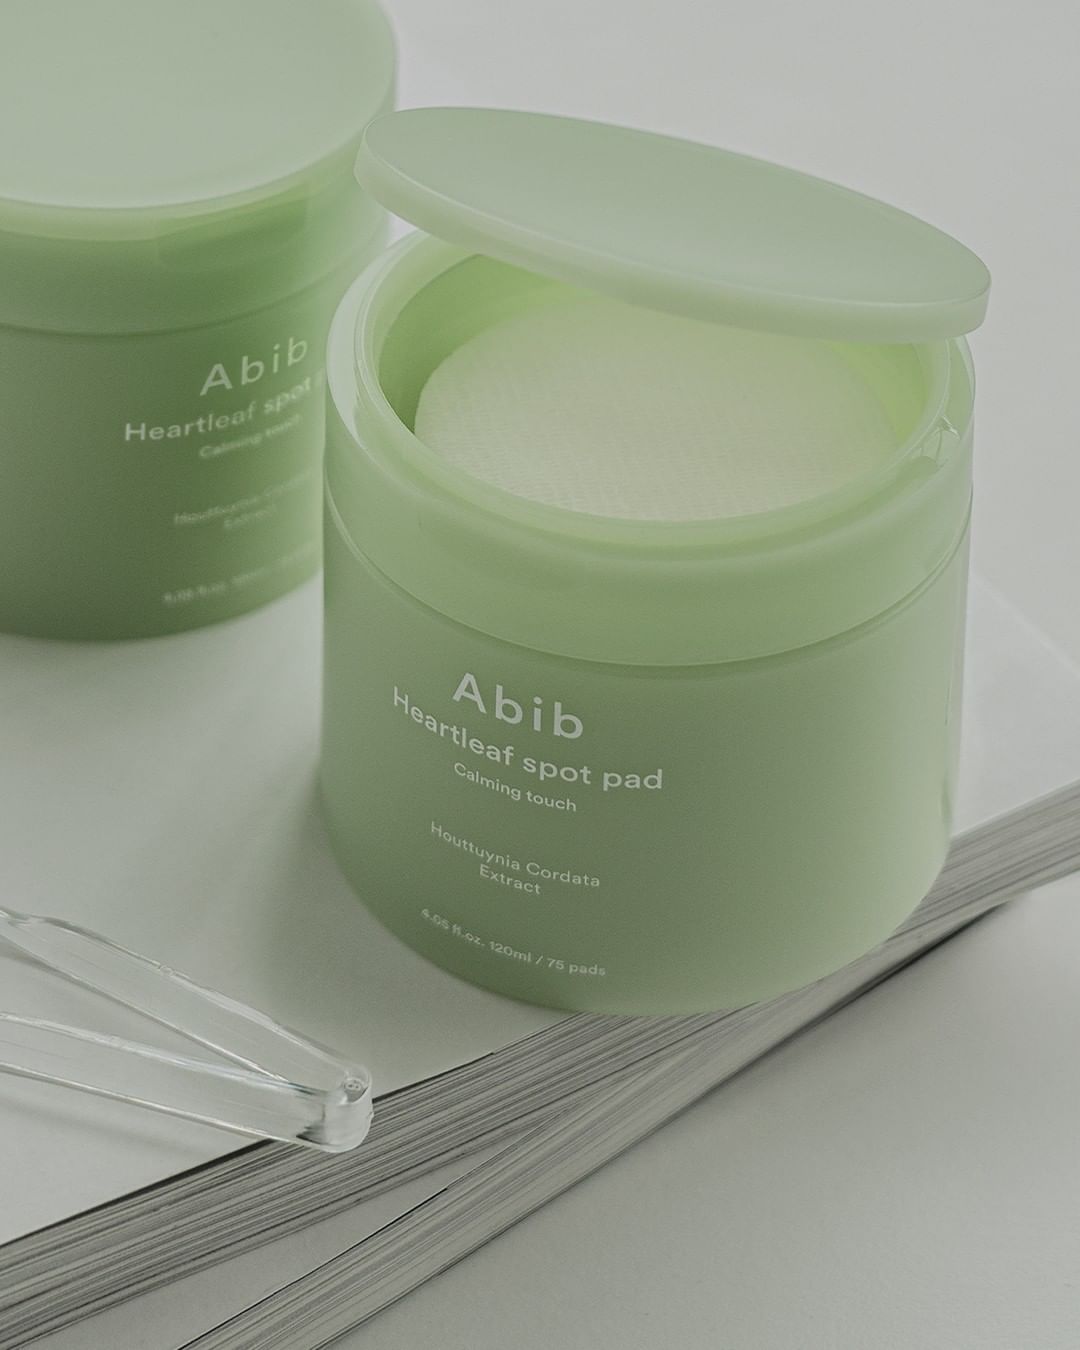 Abib Heartleaf Spot Pad Calming Touch *Renewal* - Jevy K-Beauty & Skincare